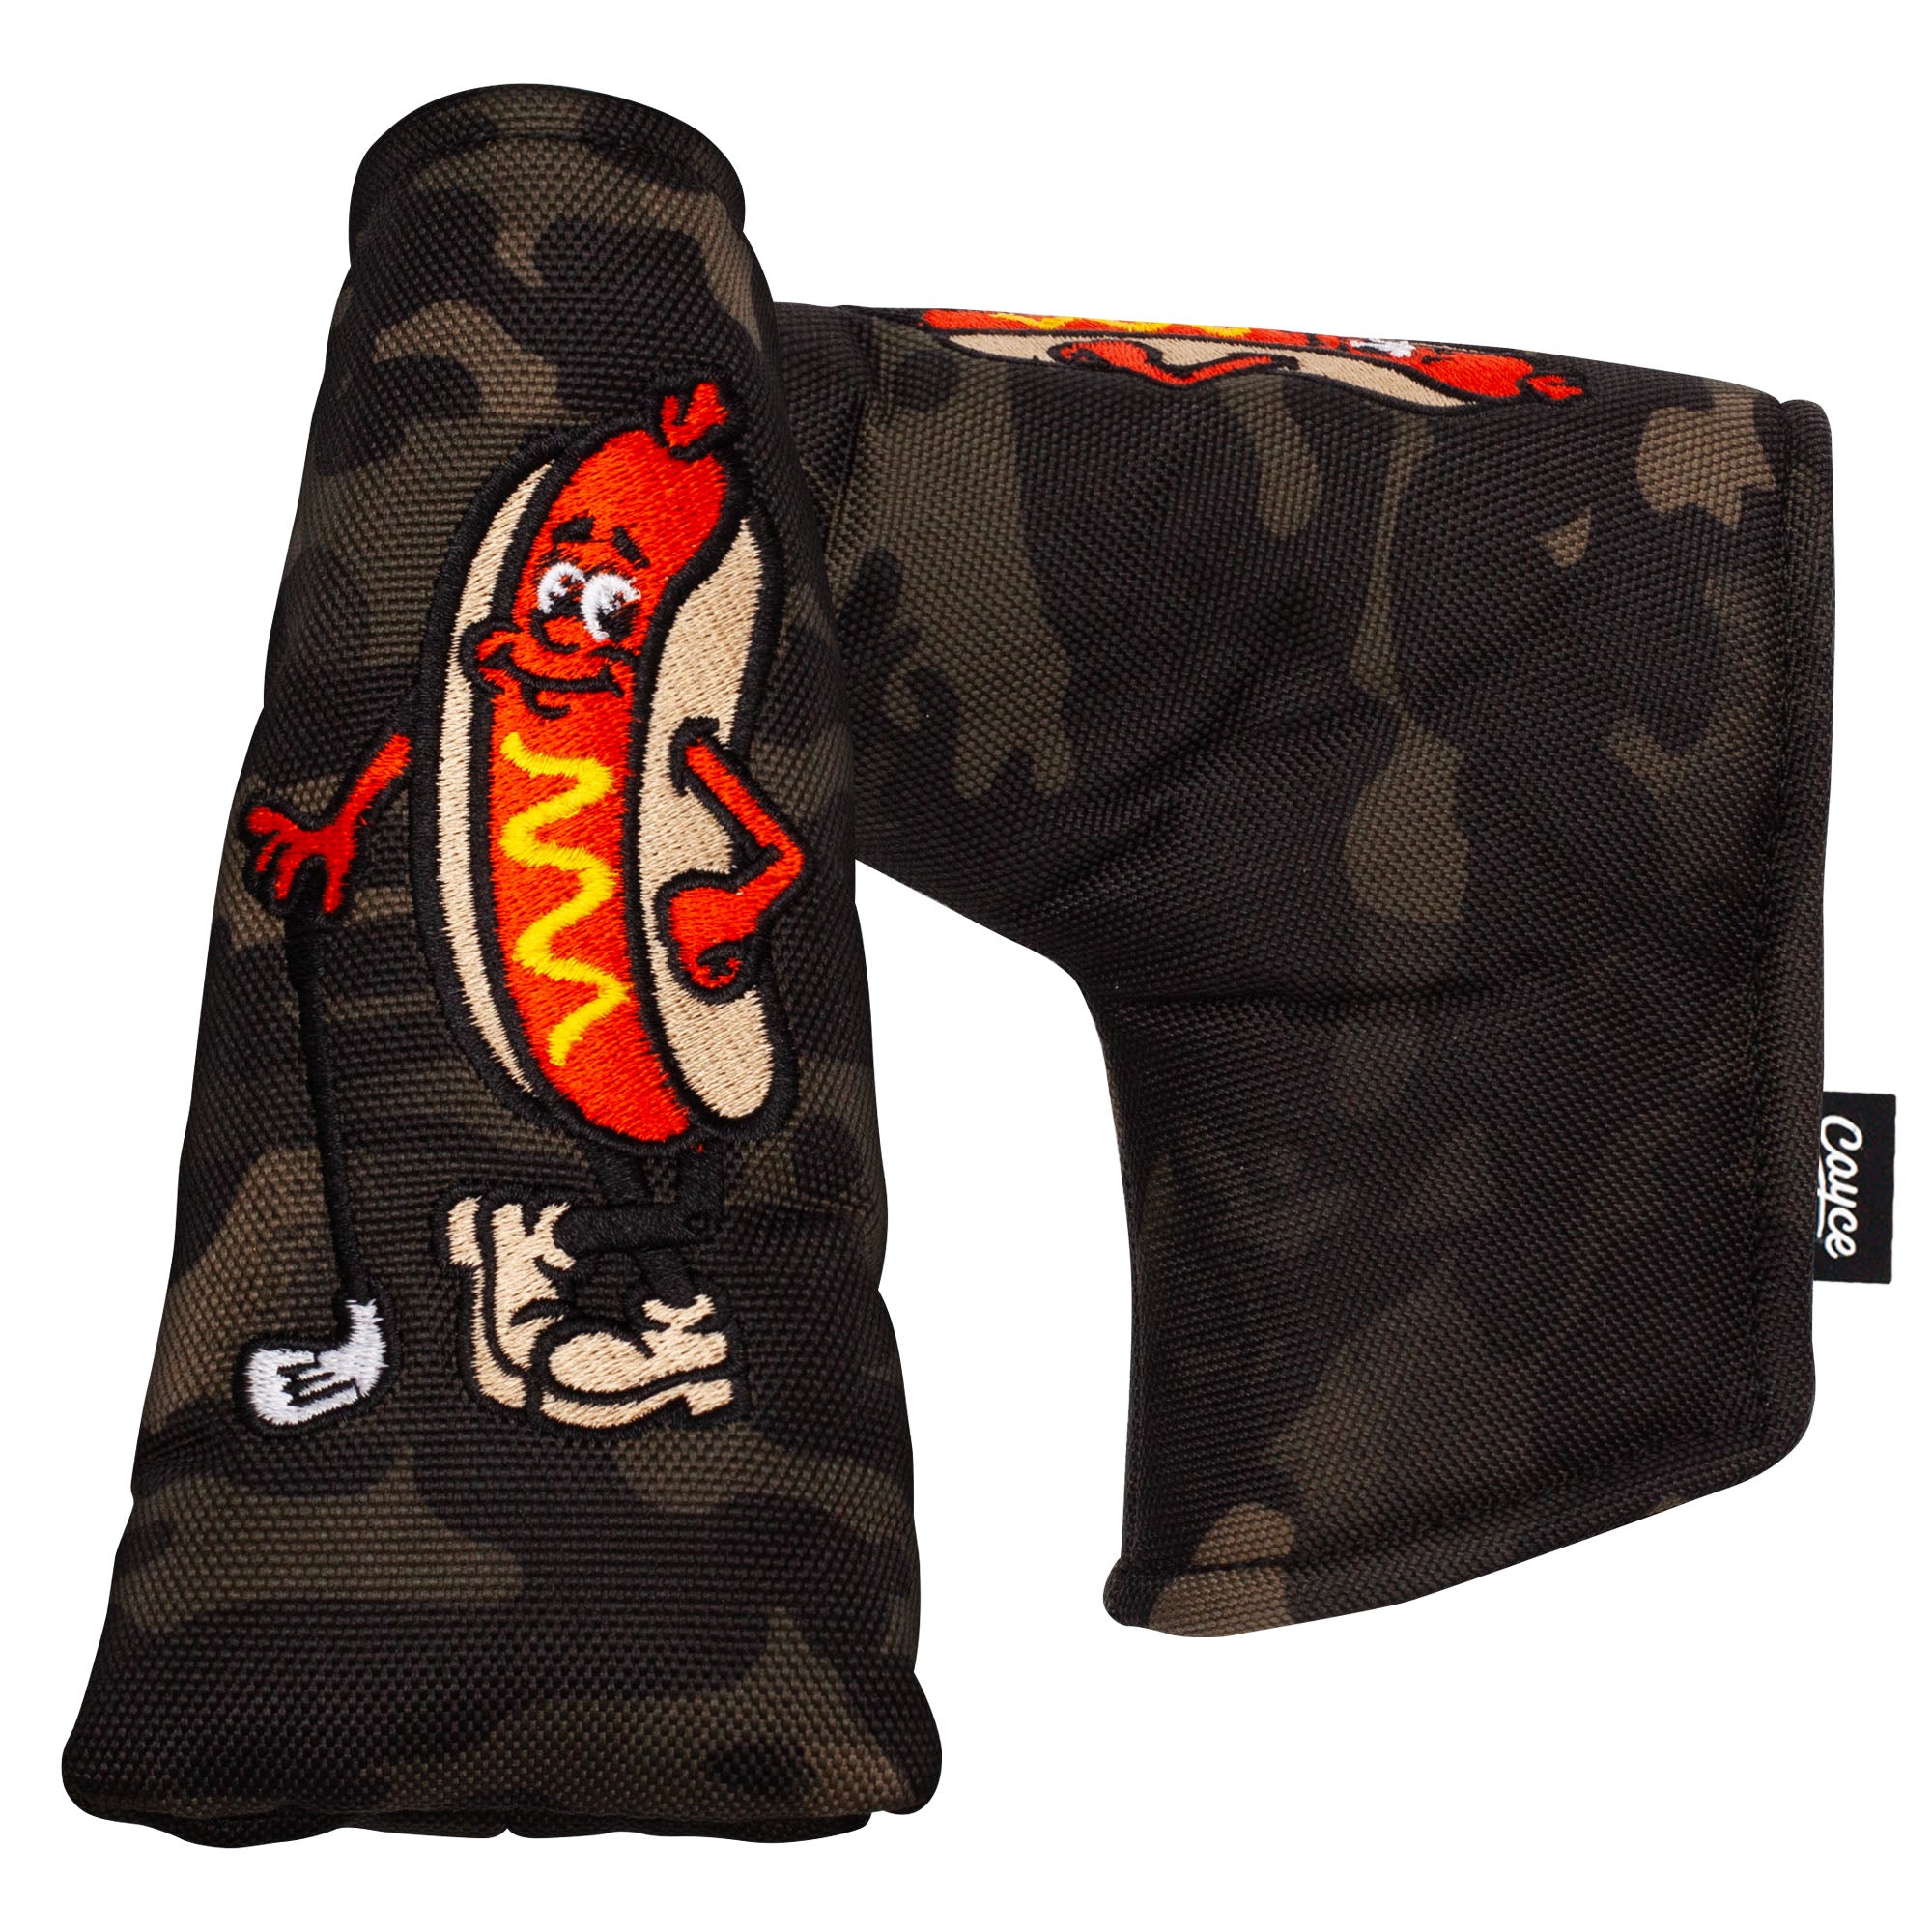 A camouflage magnetic blade putter cover with embroidered hot dog golfer on the top.